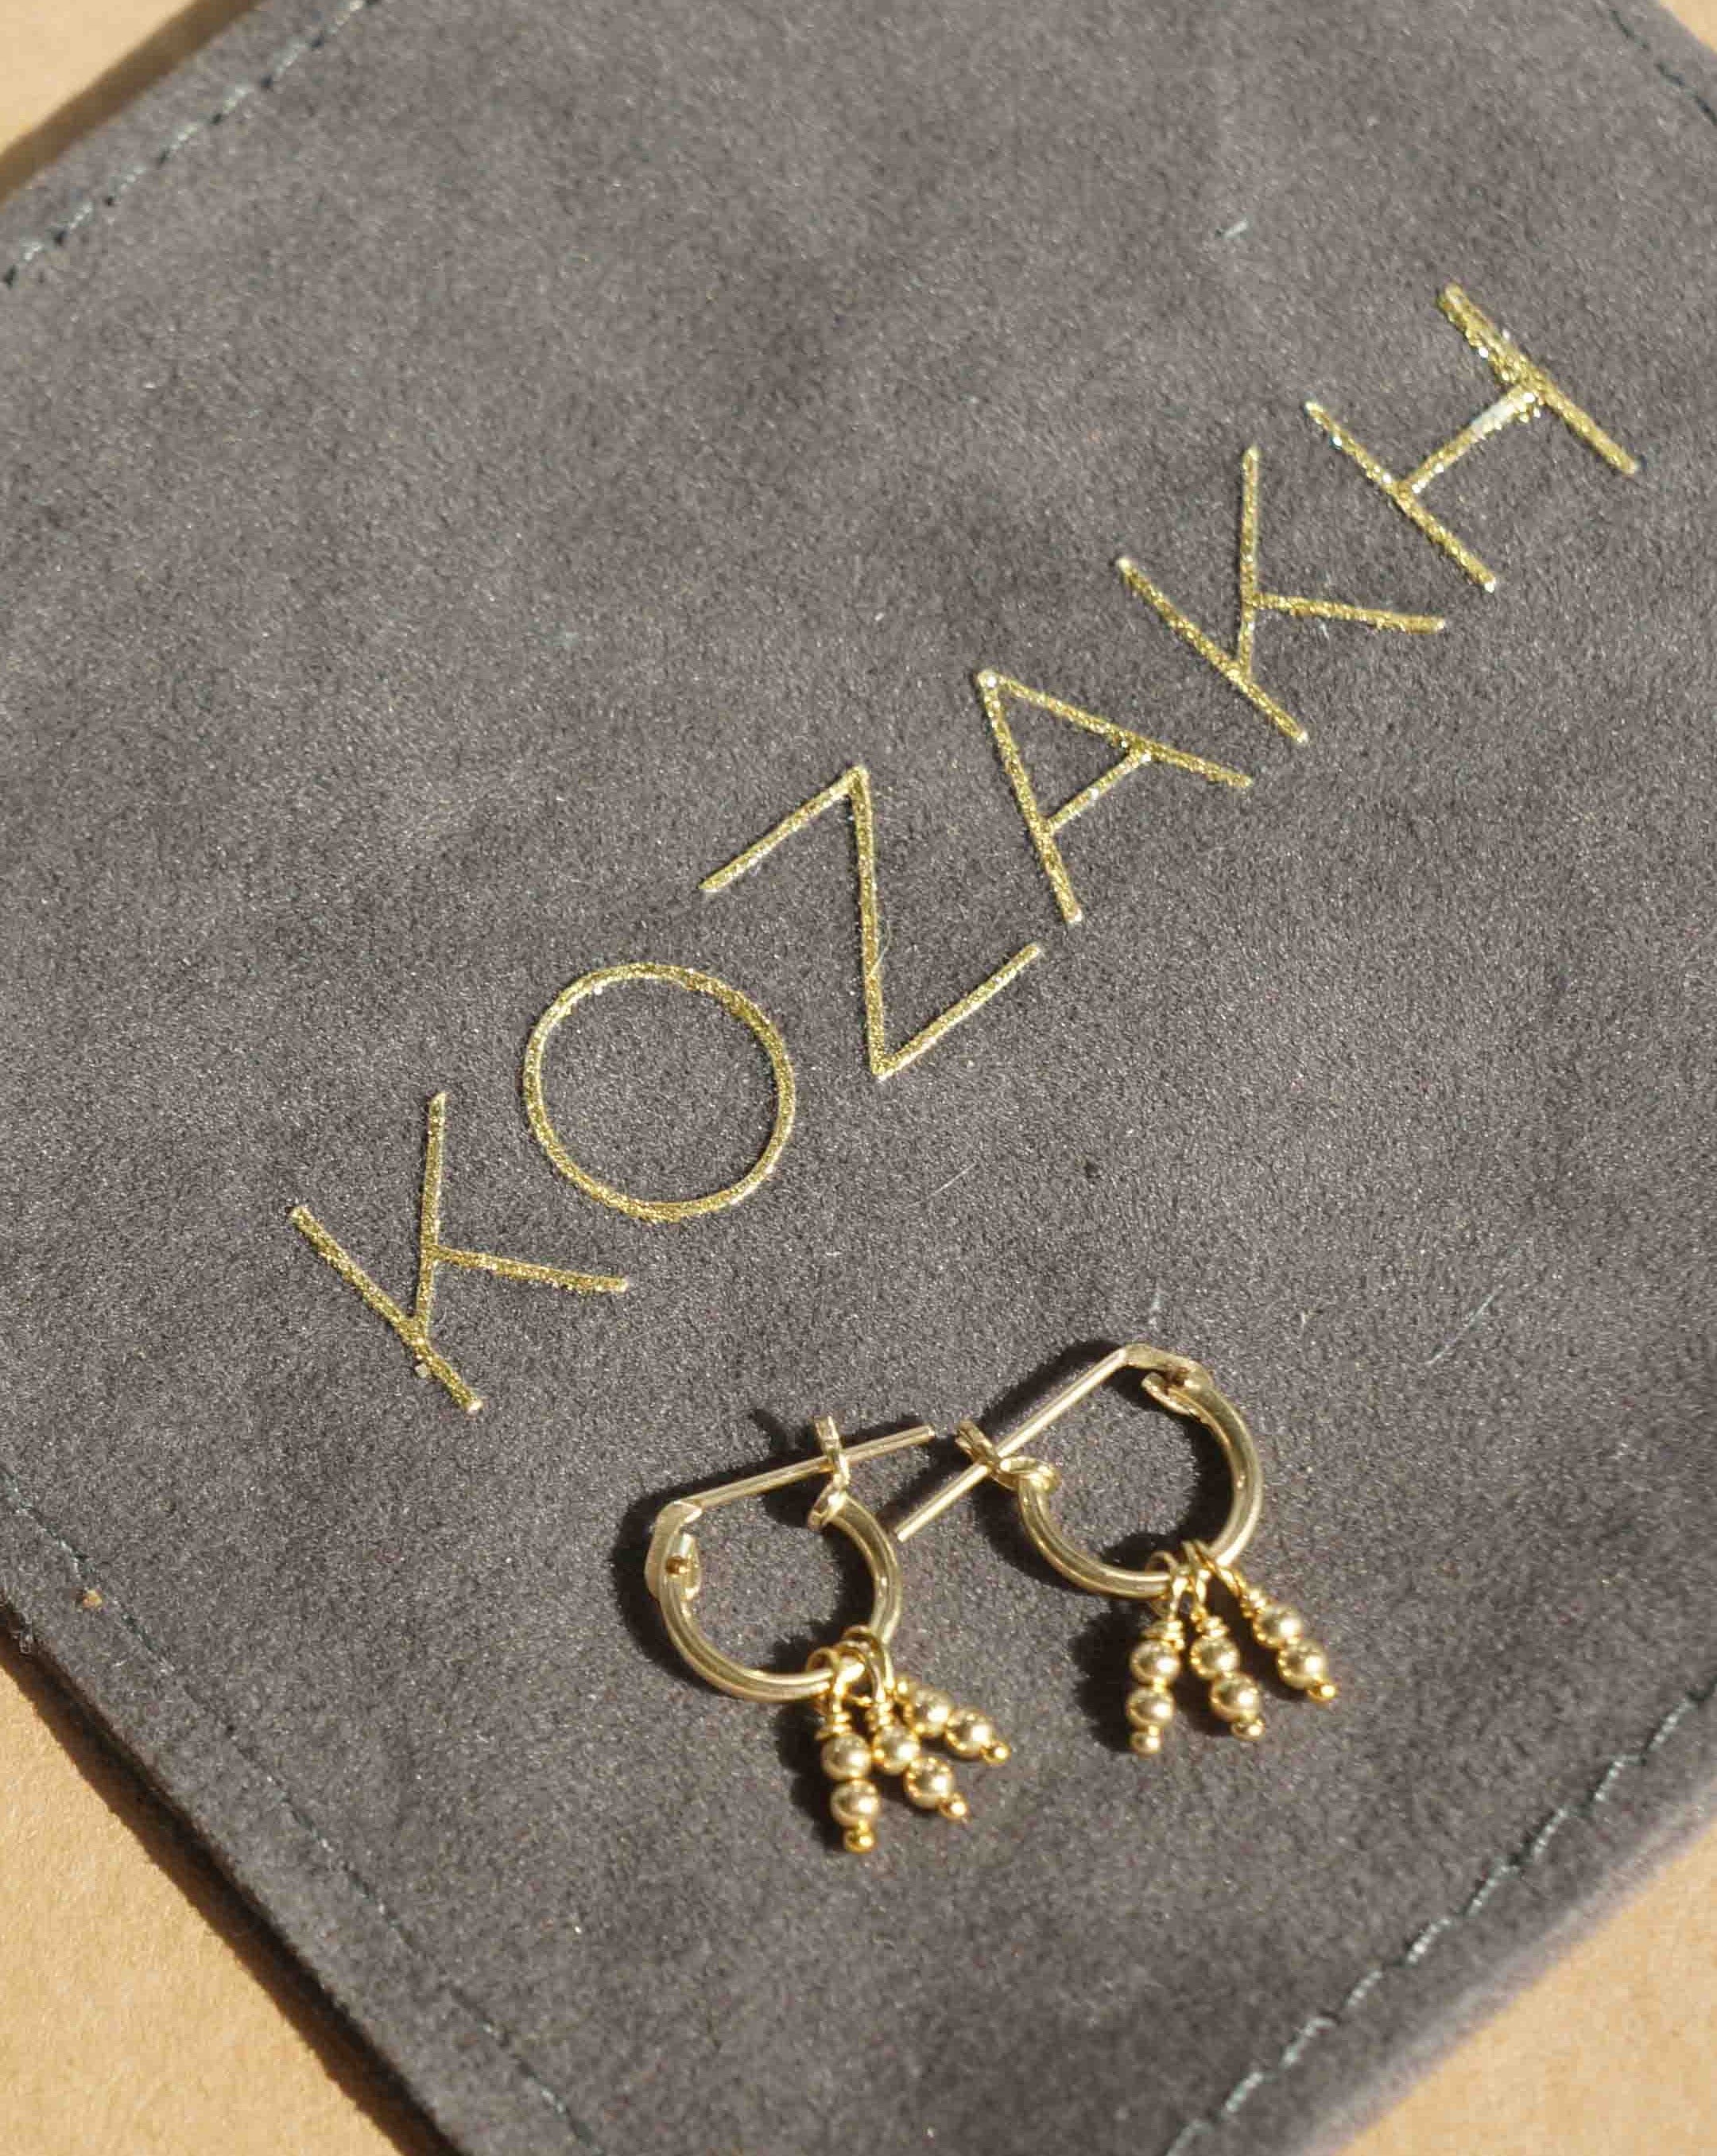 Daphne Hoop Earrings by Kozakh. 10mm Snap closure hoops crafted in 14K Gold Filled, featuring dangling gold balls.